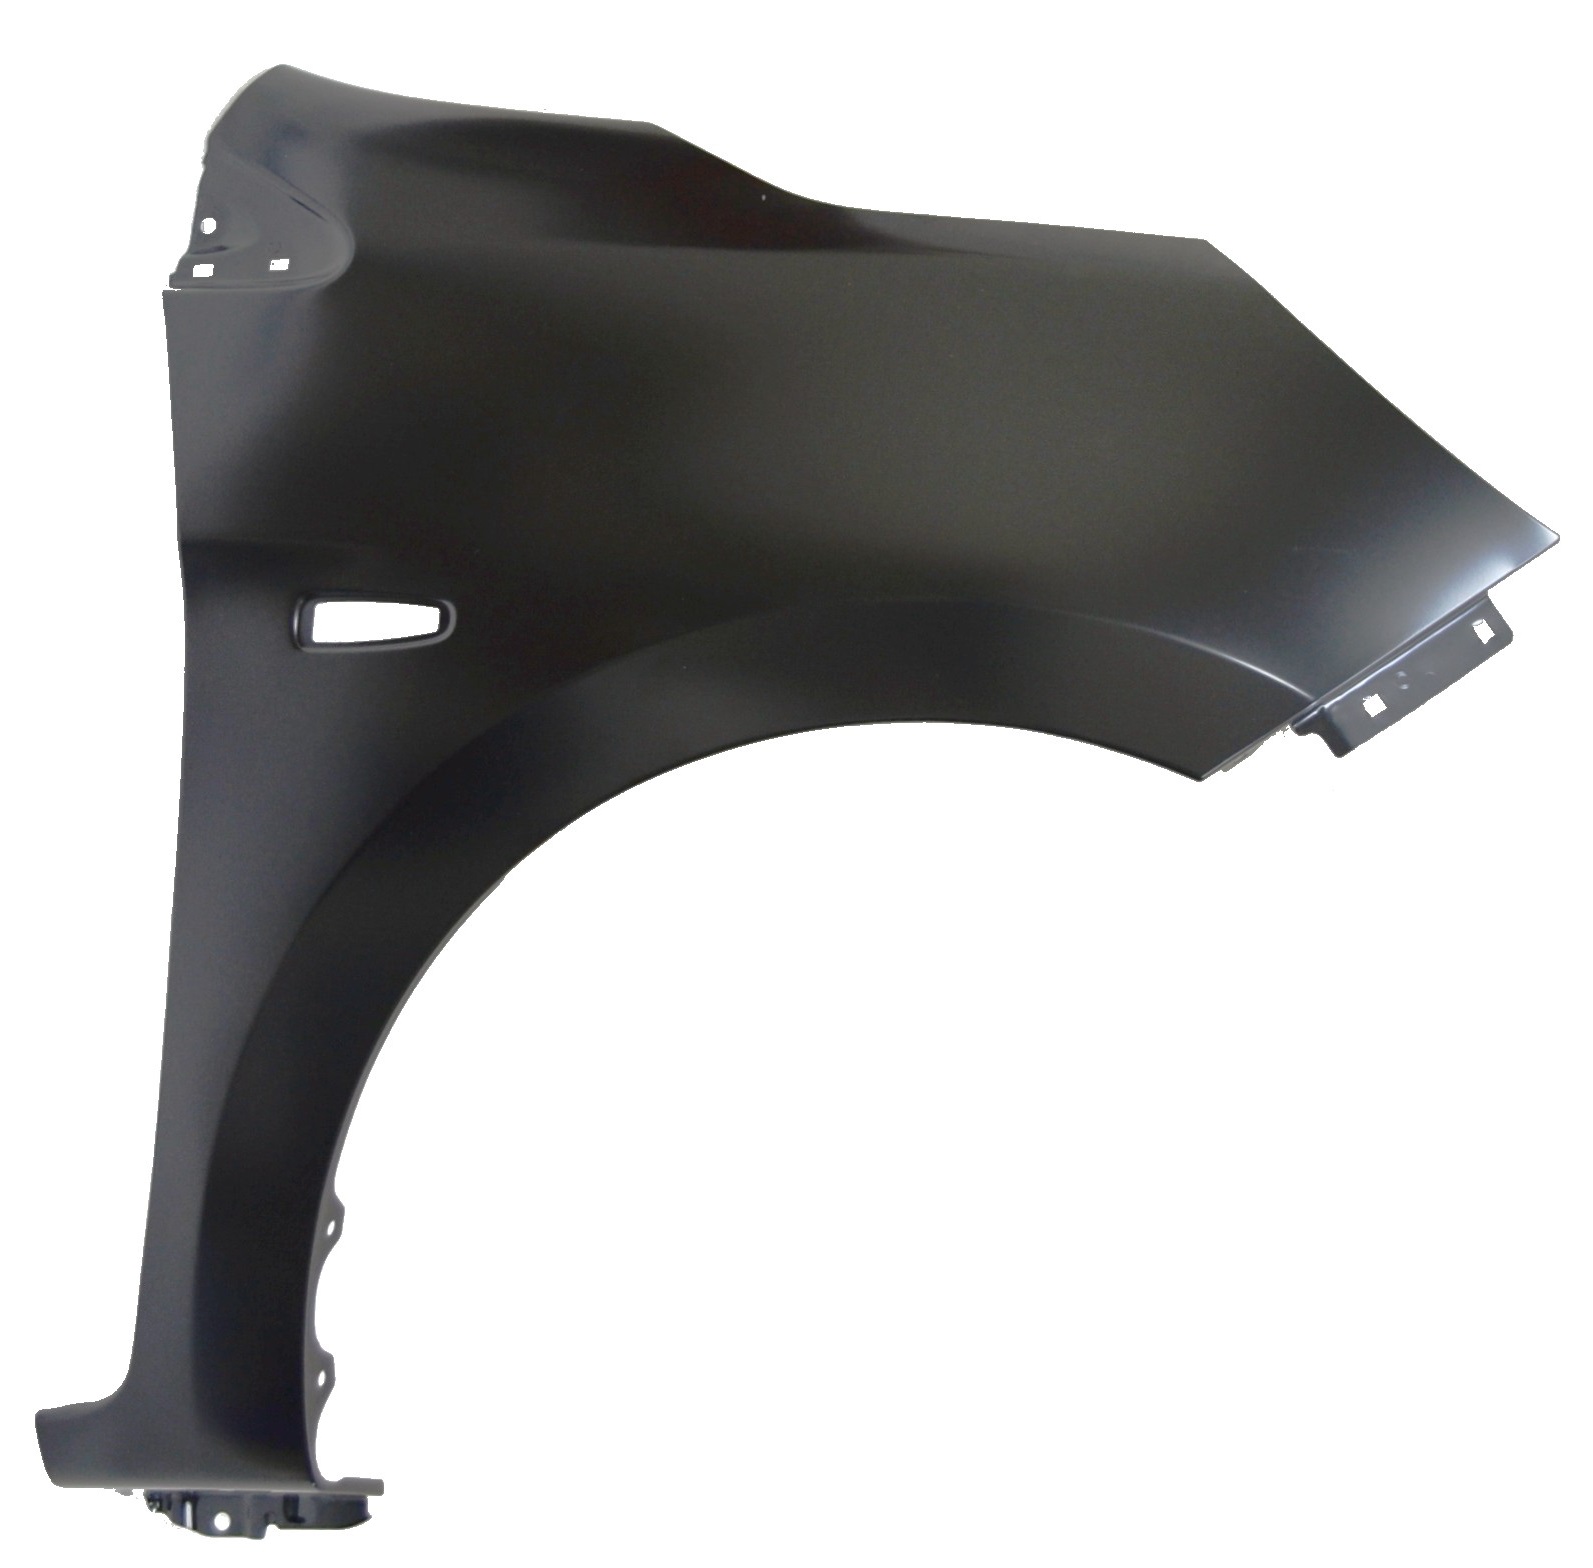 MIRAGE 14-17 Right FENDER With SIGNAL LAMP HOLE